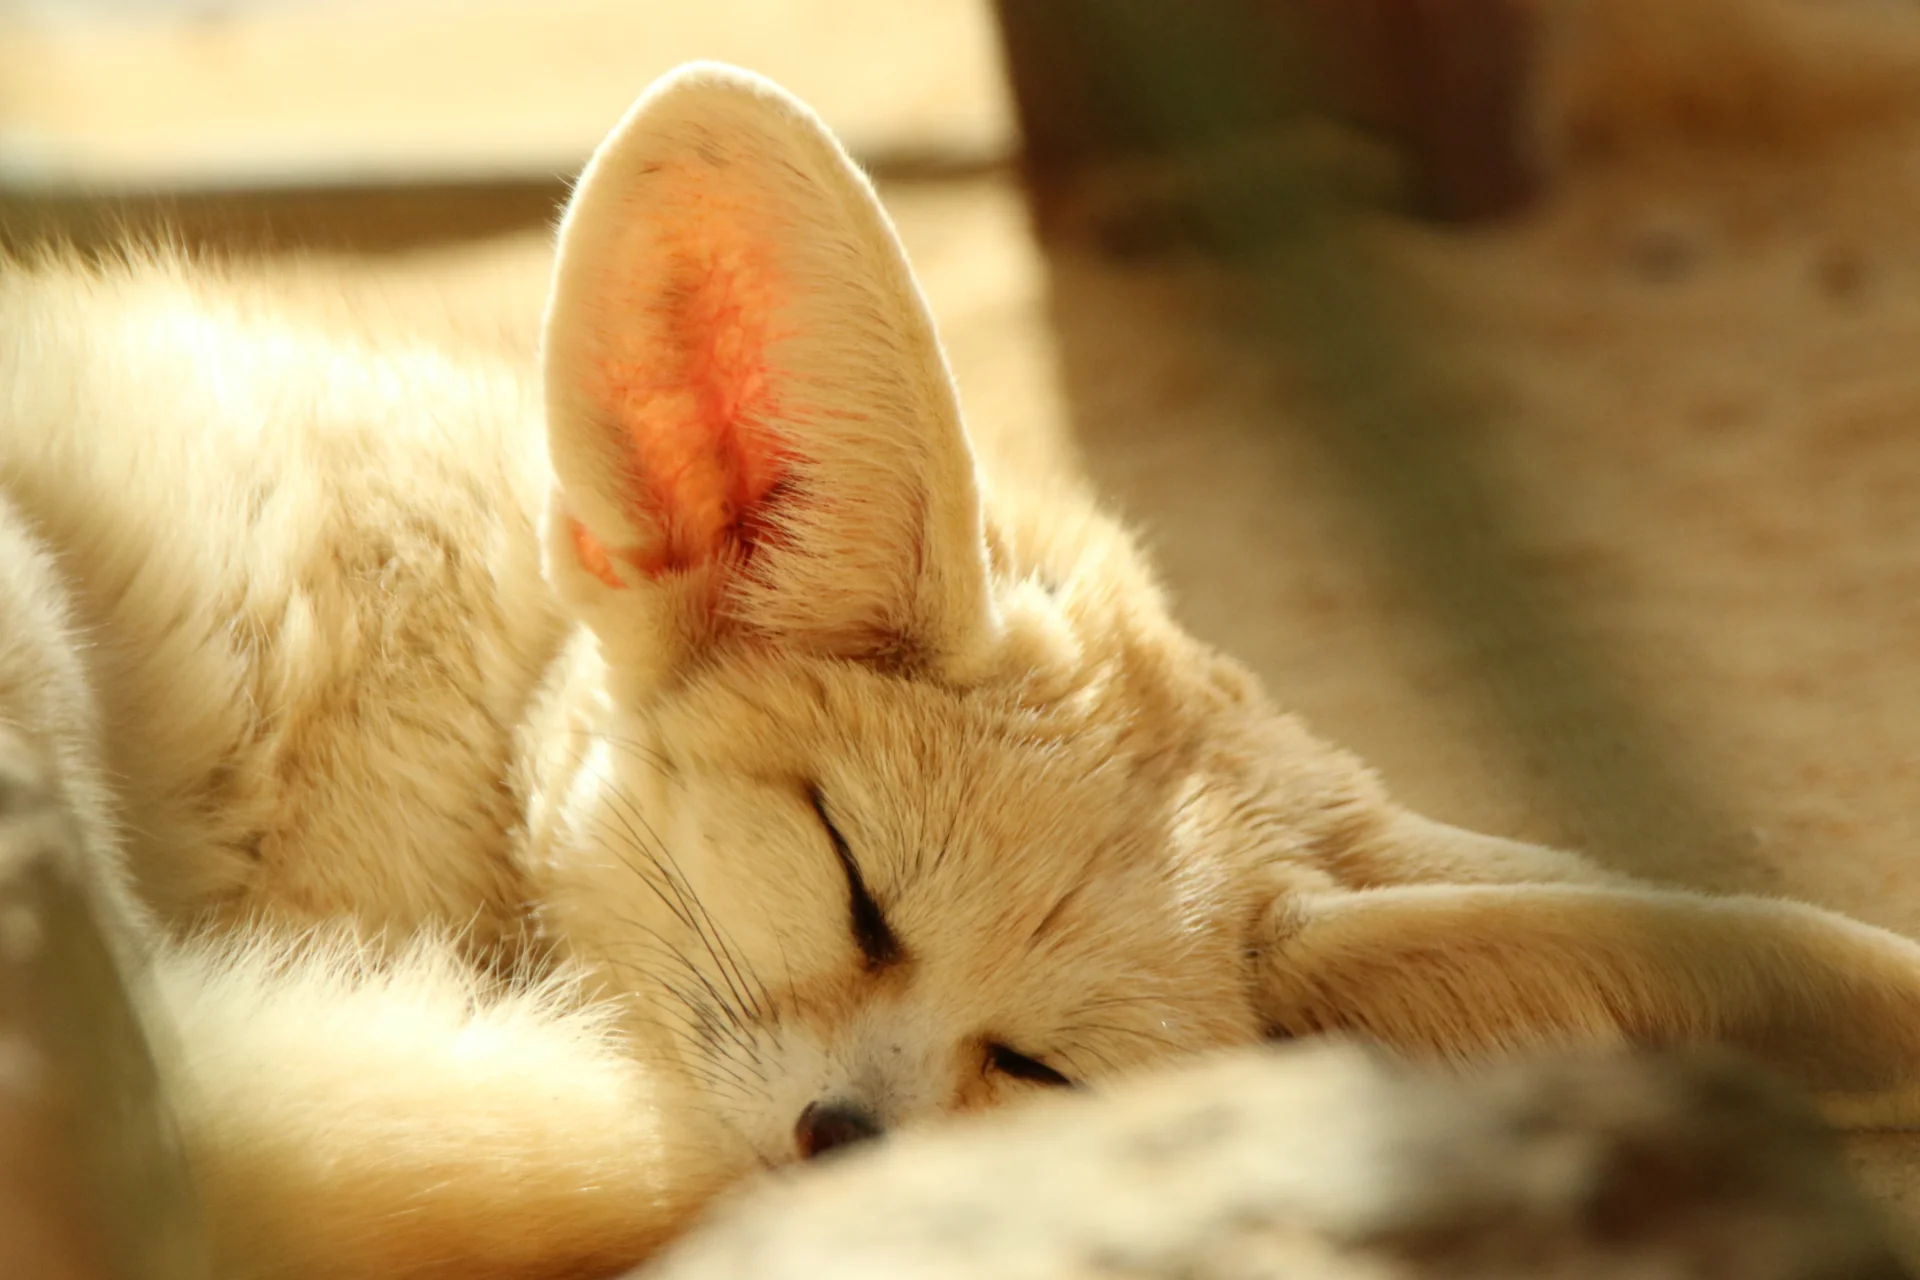 Sleeping fennec fox curled up behind some larger stones and halfway obscured by it. Her eyes are almost all closed but her ears were probably tracking my camera.